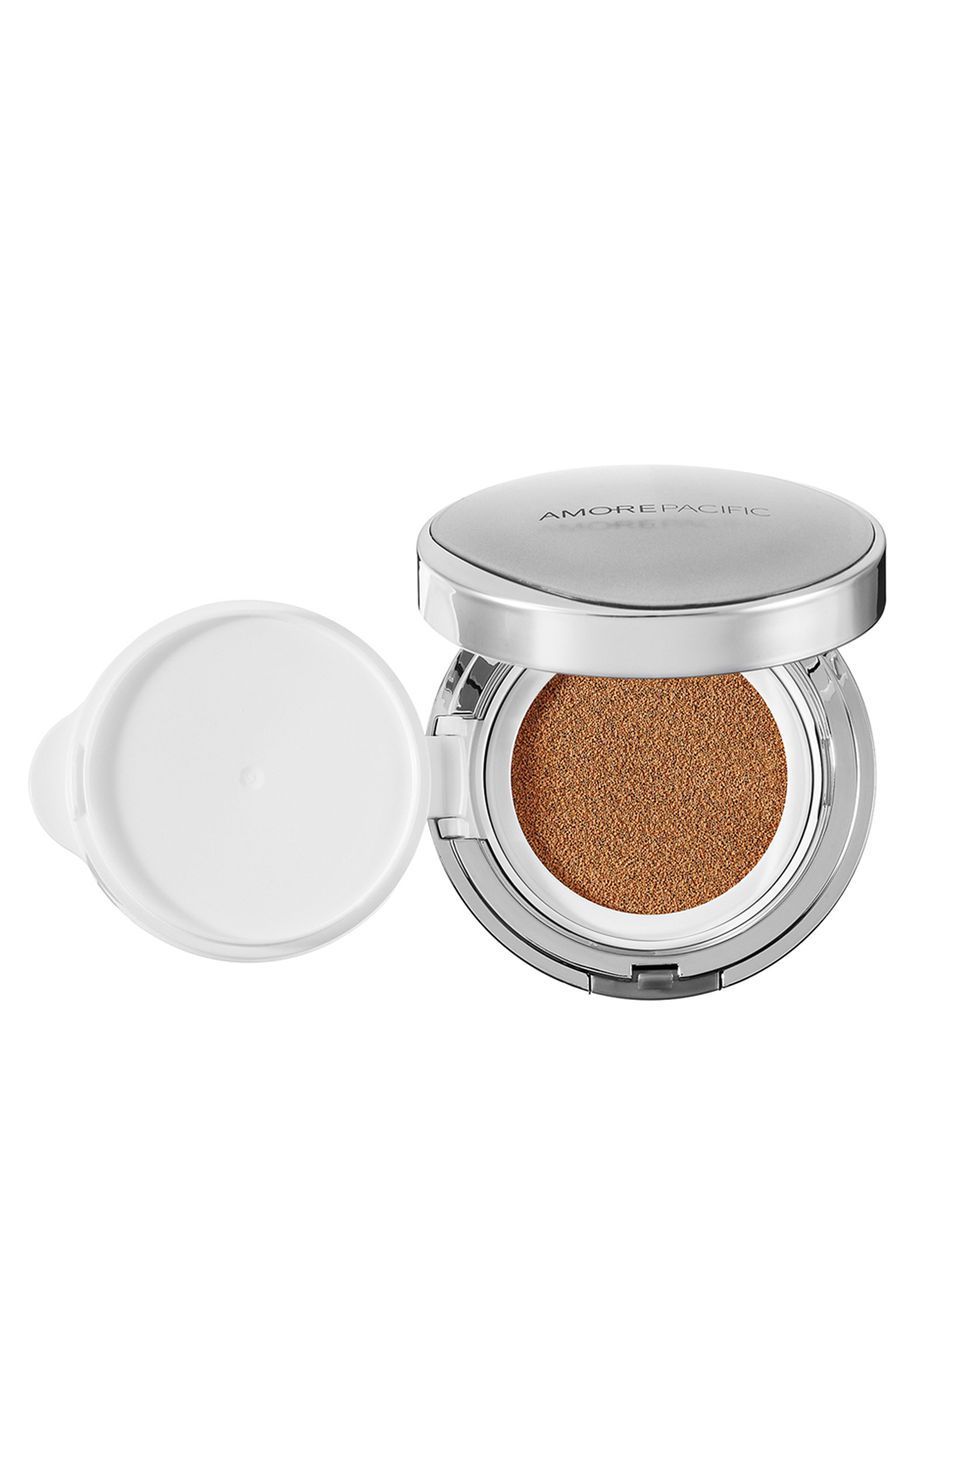 AmorePacific Color Control Cushion Compact Broad Spectrum SPF 50+